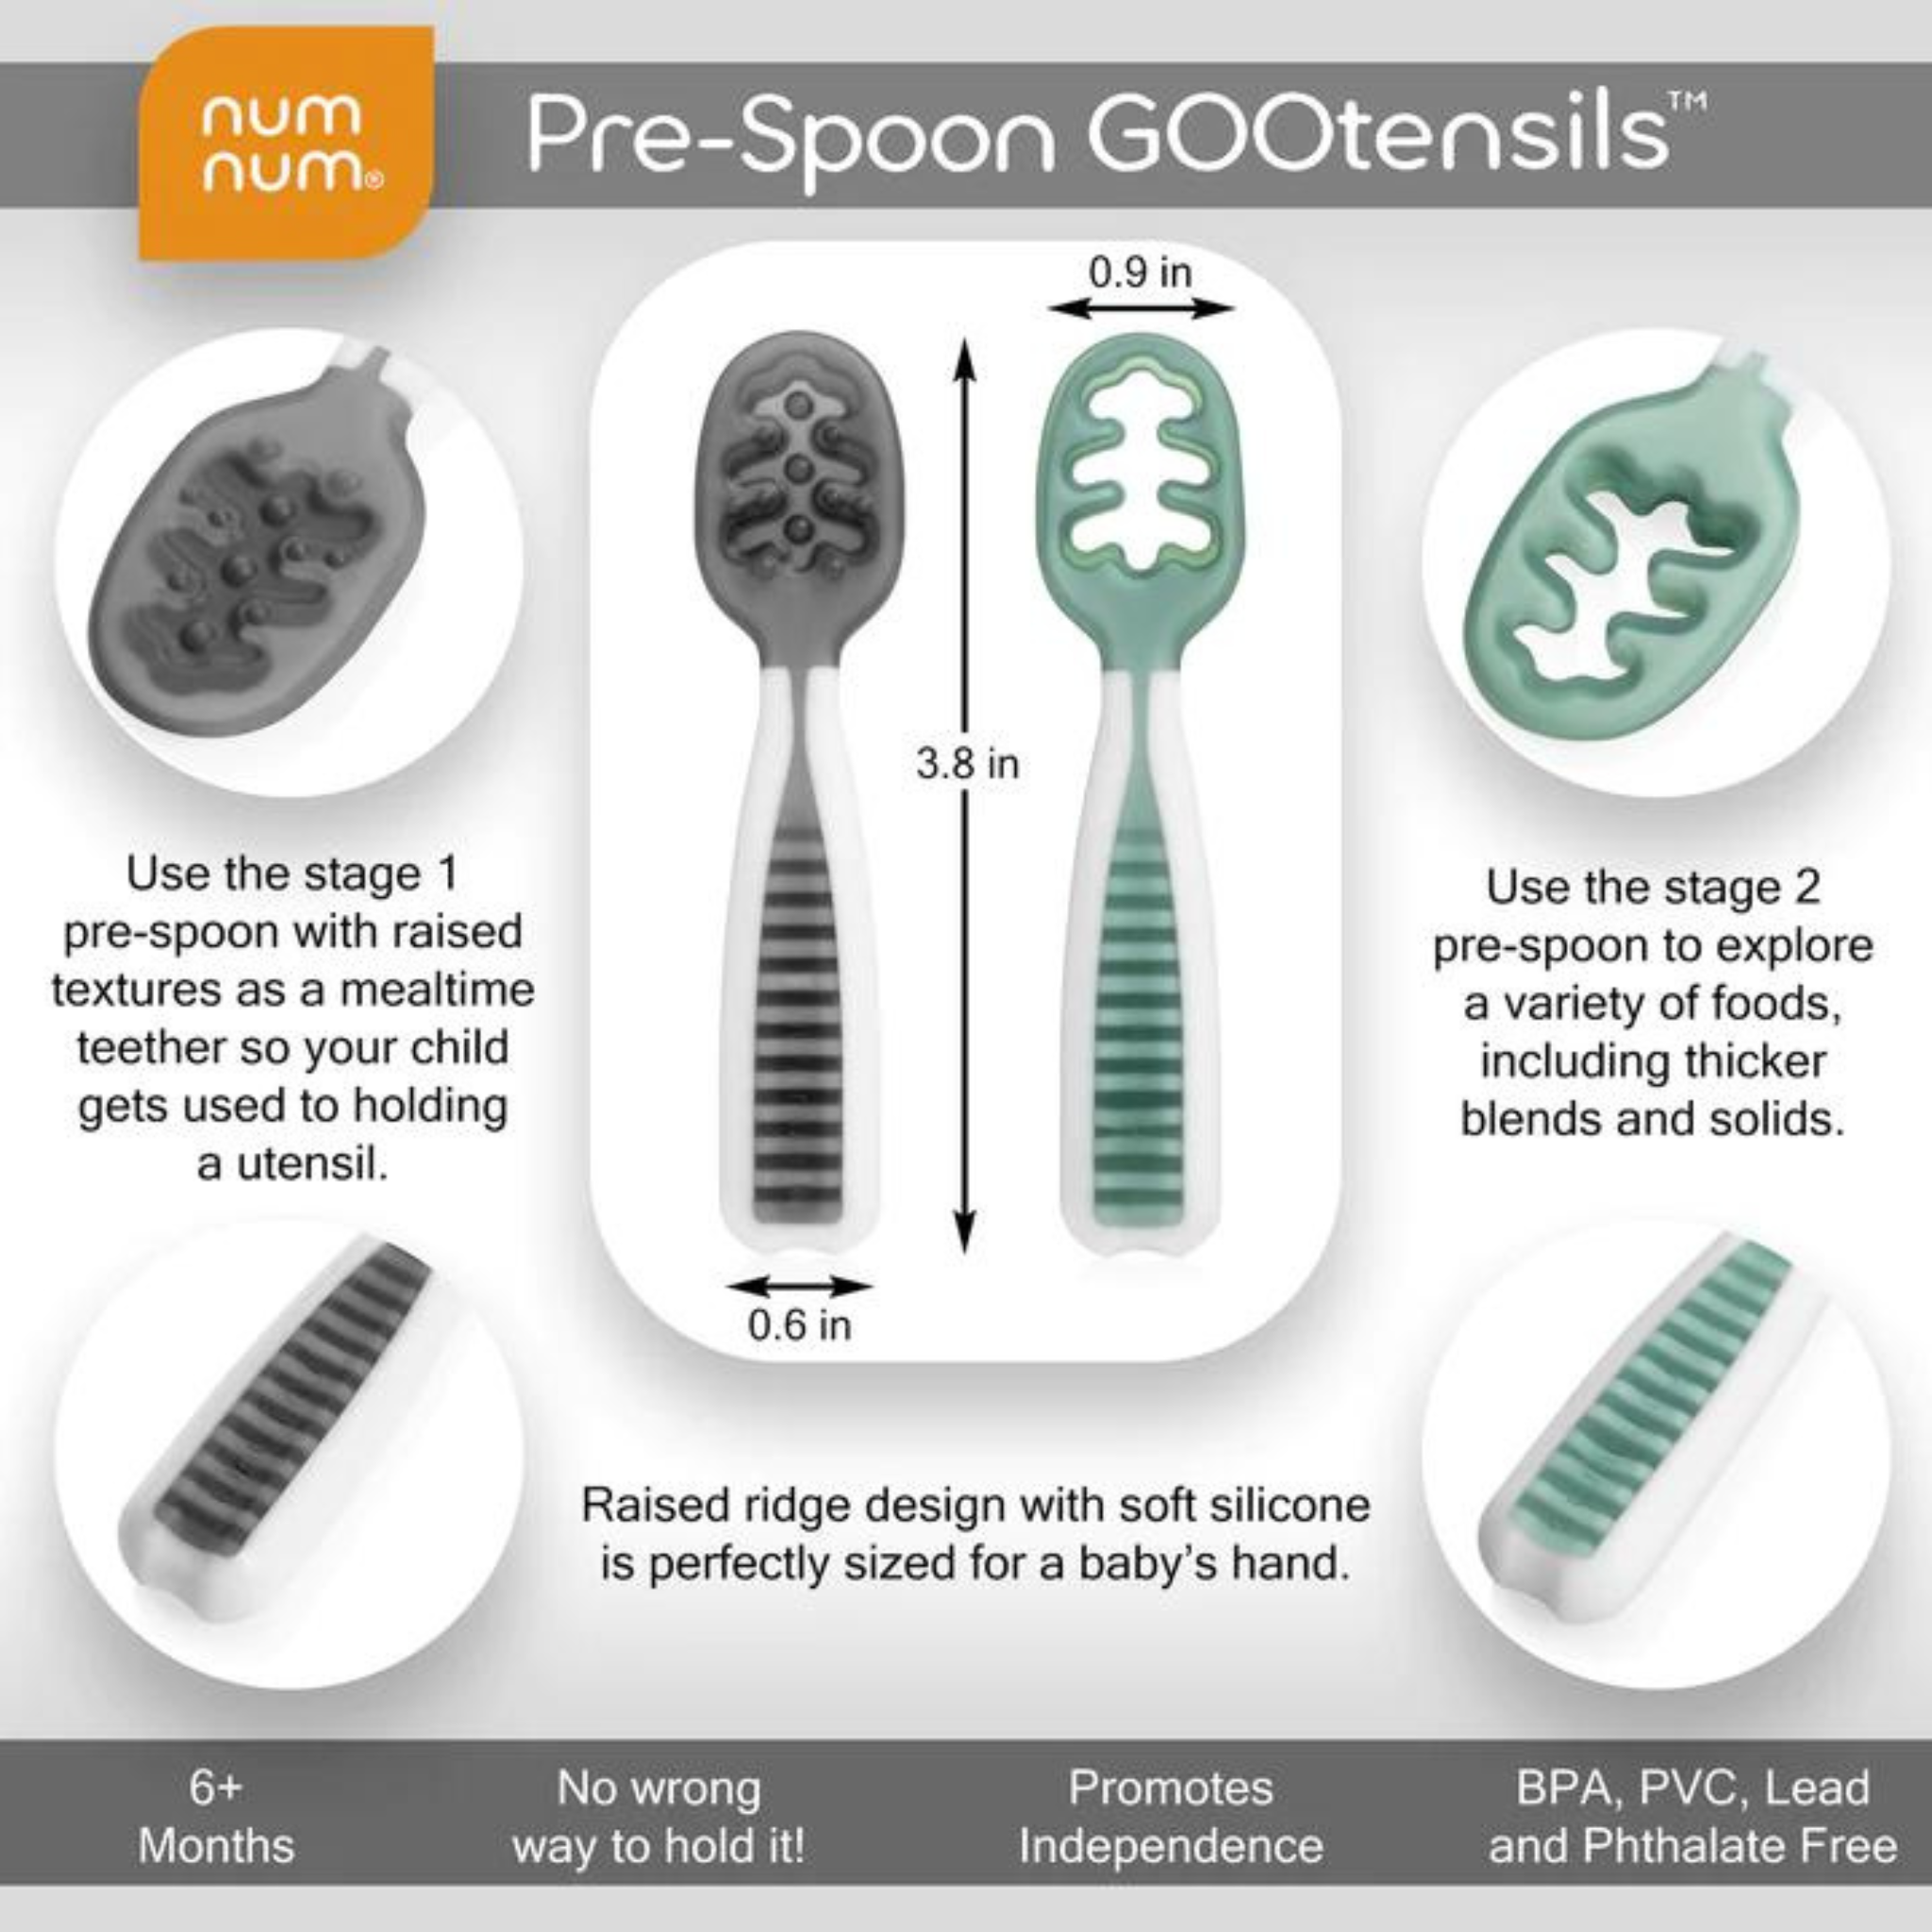 The NumNum Pre-Spoon GOOtensil - The Perfect First Spoon for